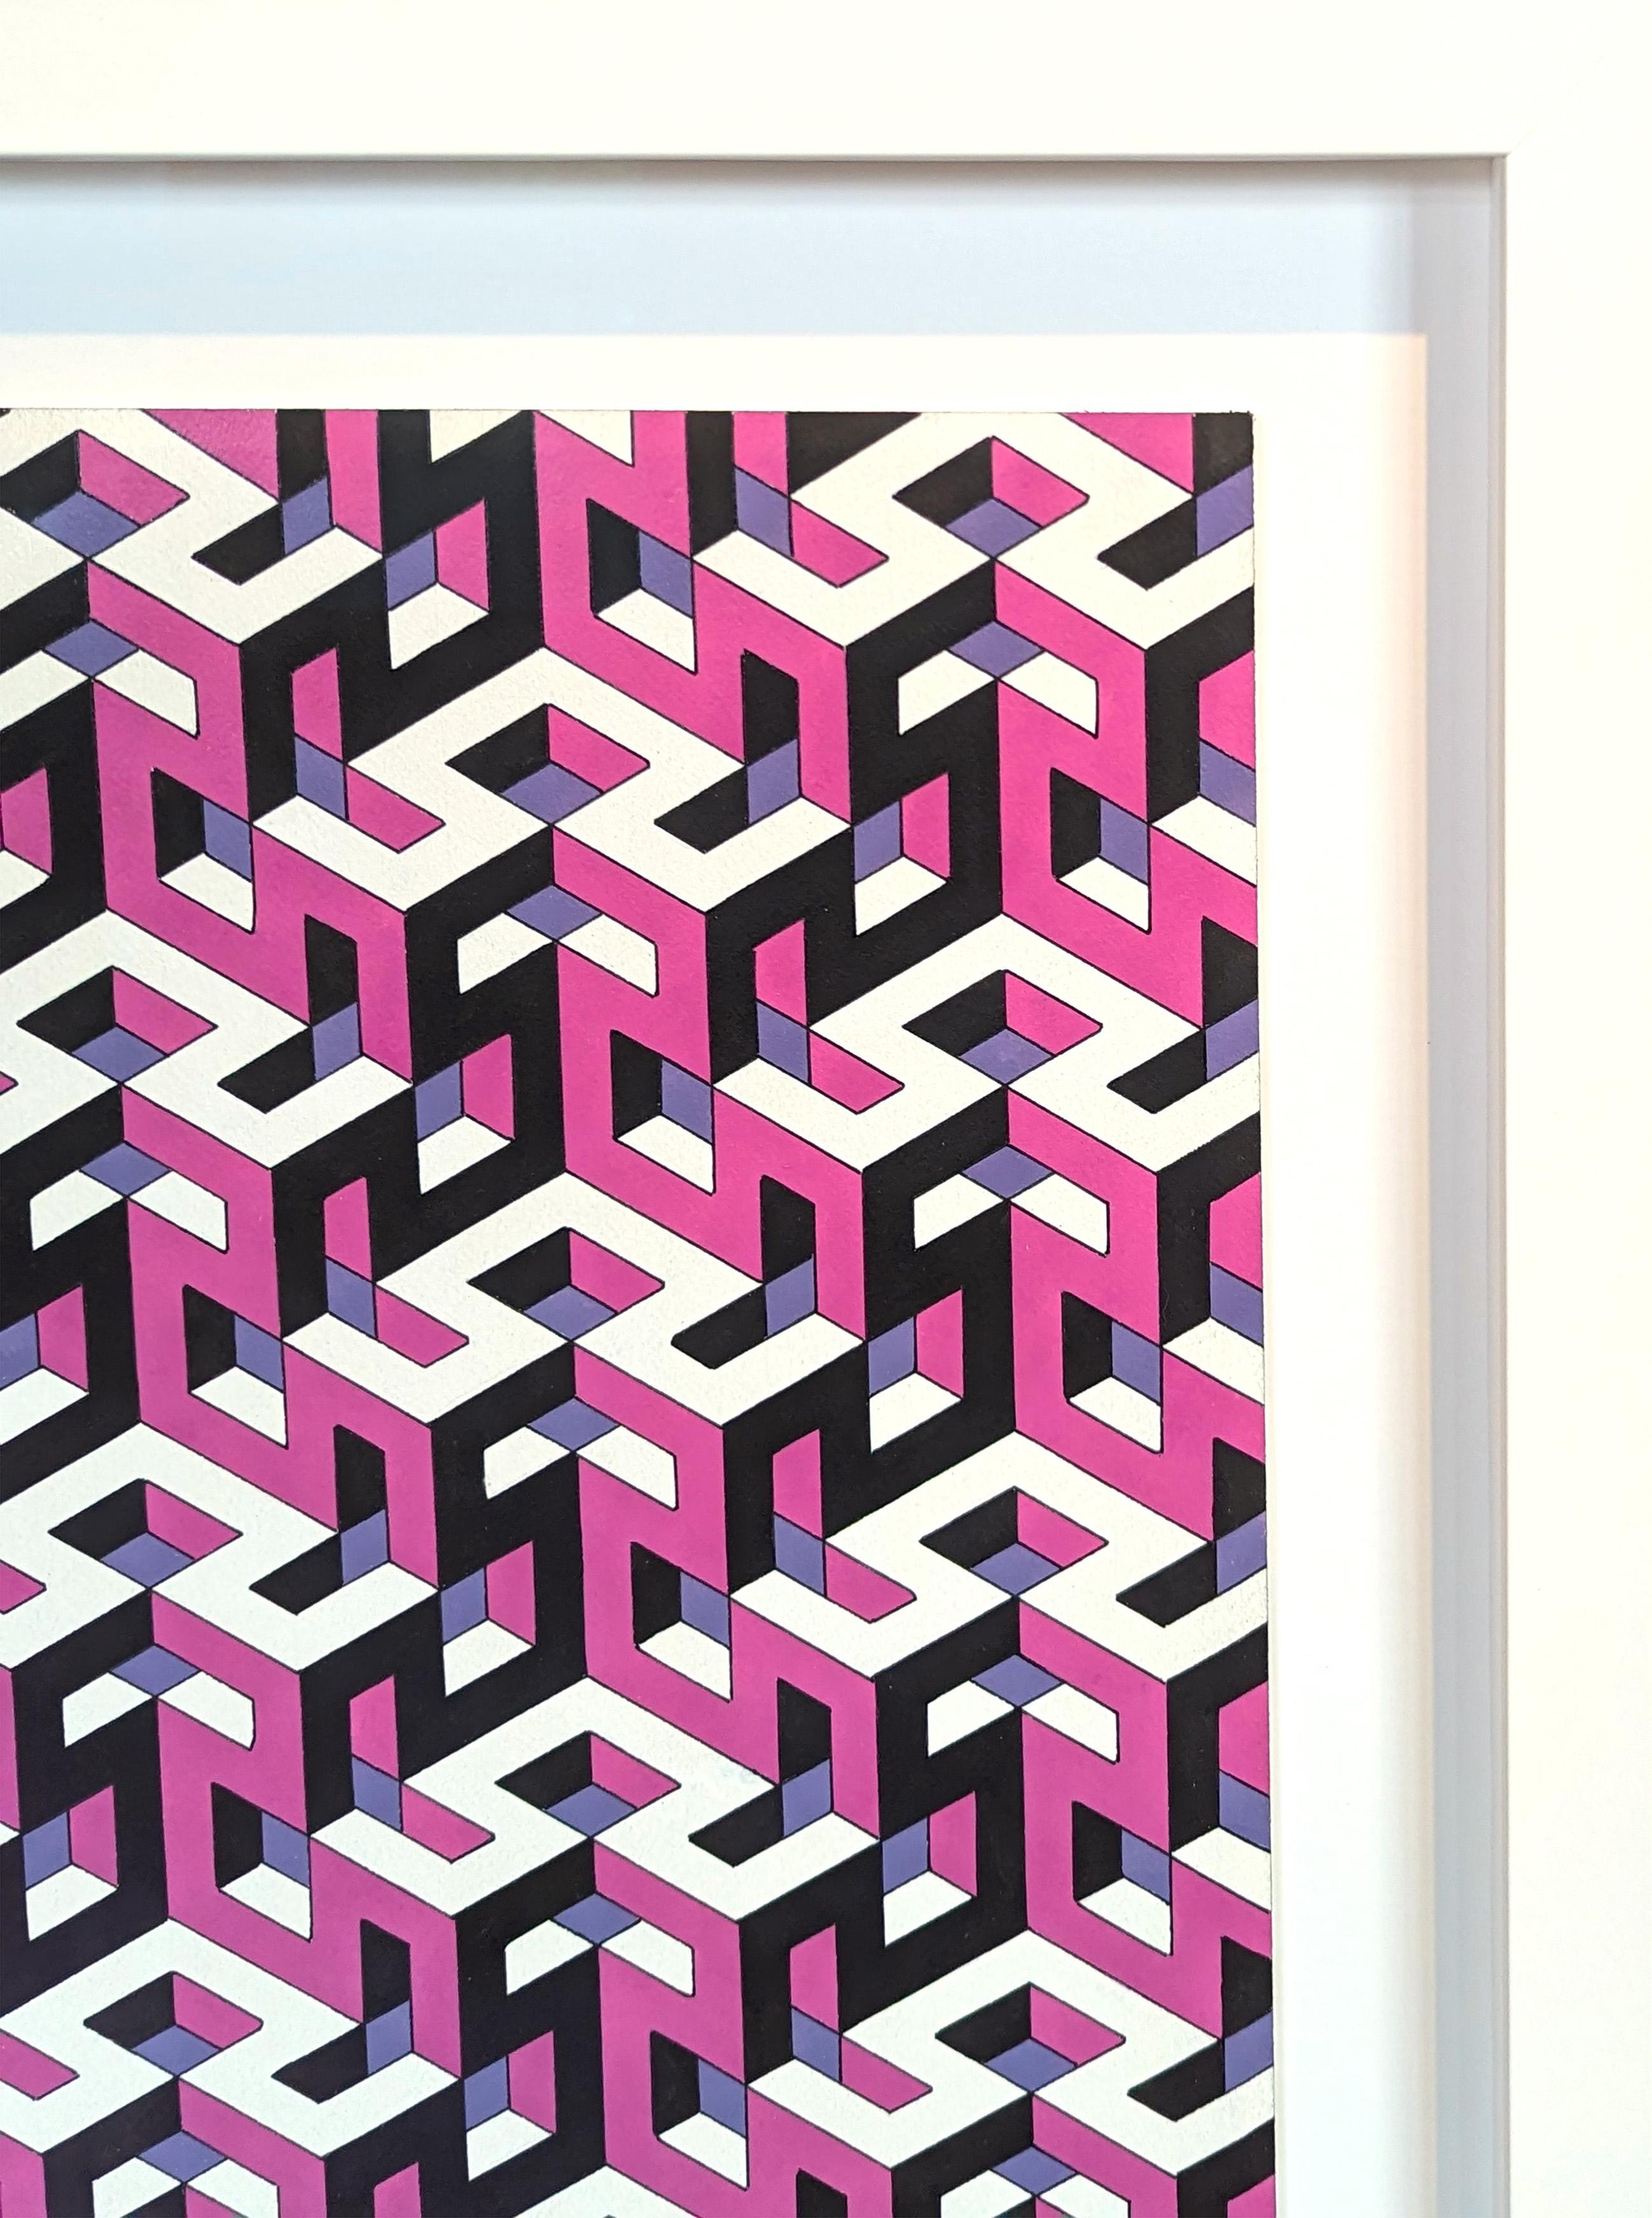 Hand drawn op art painting by contemporary artist Austin Magruder. The work features abstract, geometric tessellations that create a mesmerizing pattern. Signed and dated in the front lower right corner. Currently hung in a white floating frame.